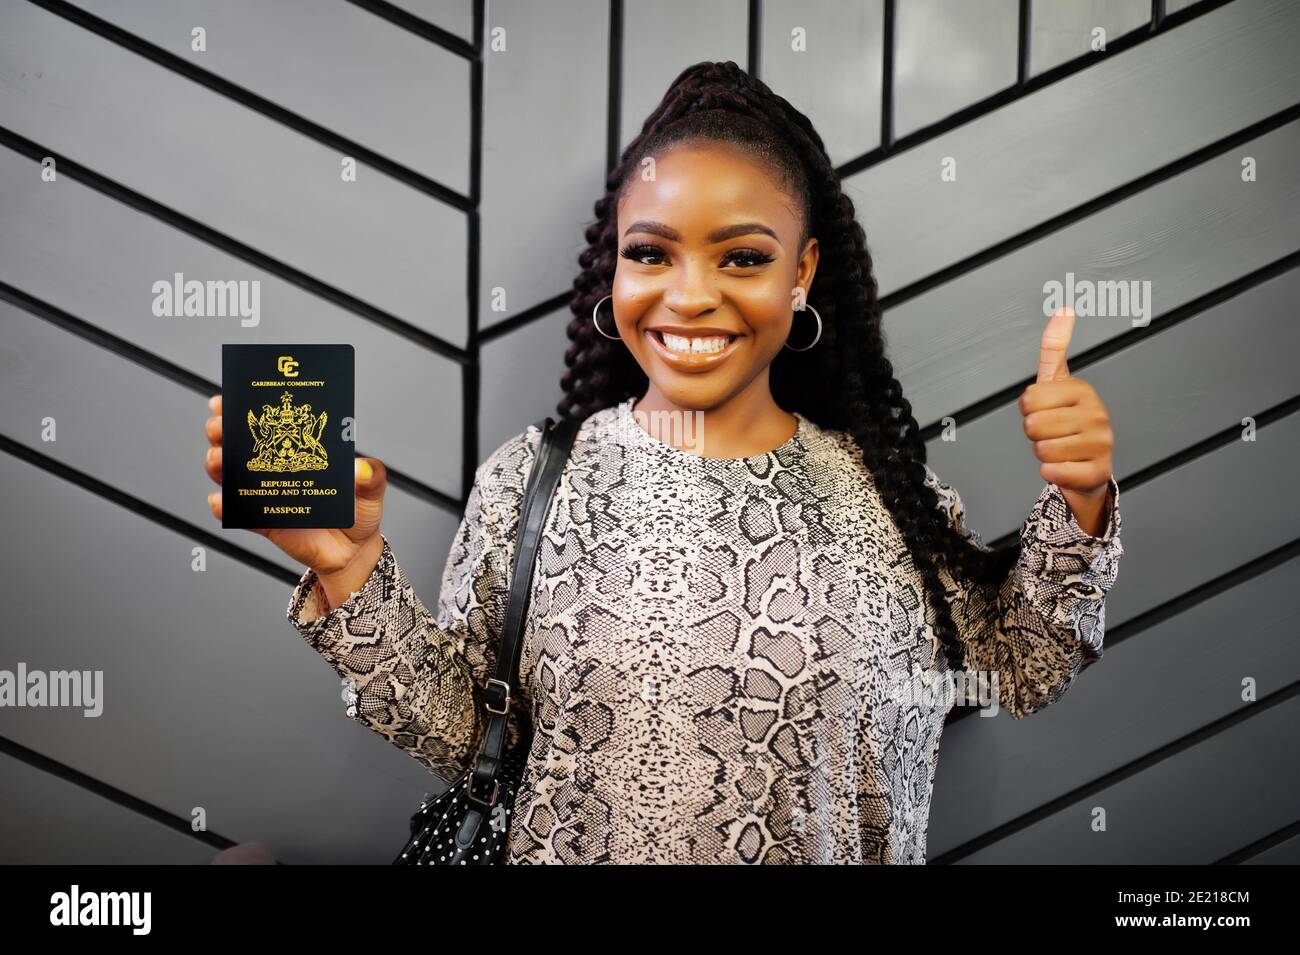 Close up portrait of young positive african american woman holding Trinidad and Tobago passport and thumbs up. Stock Photo